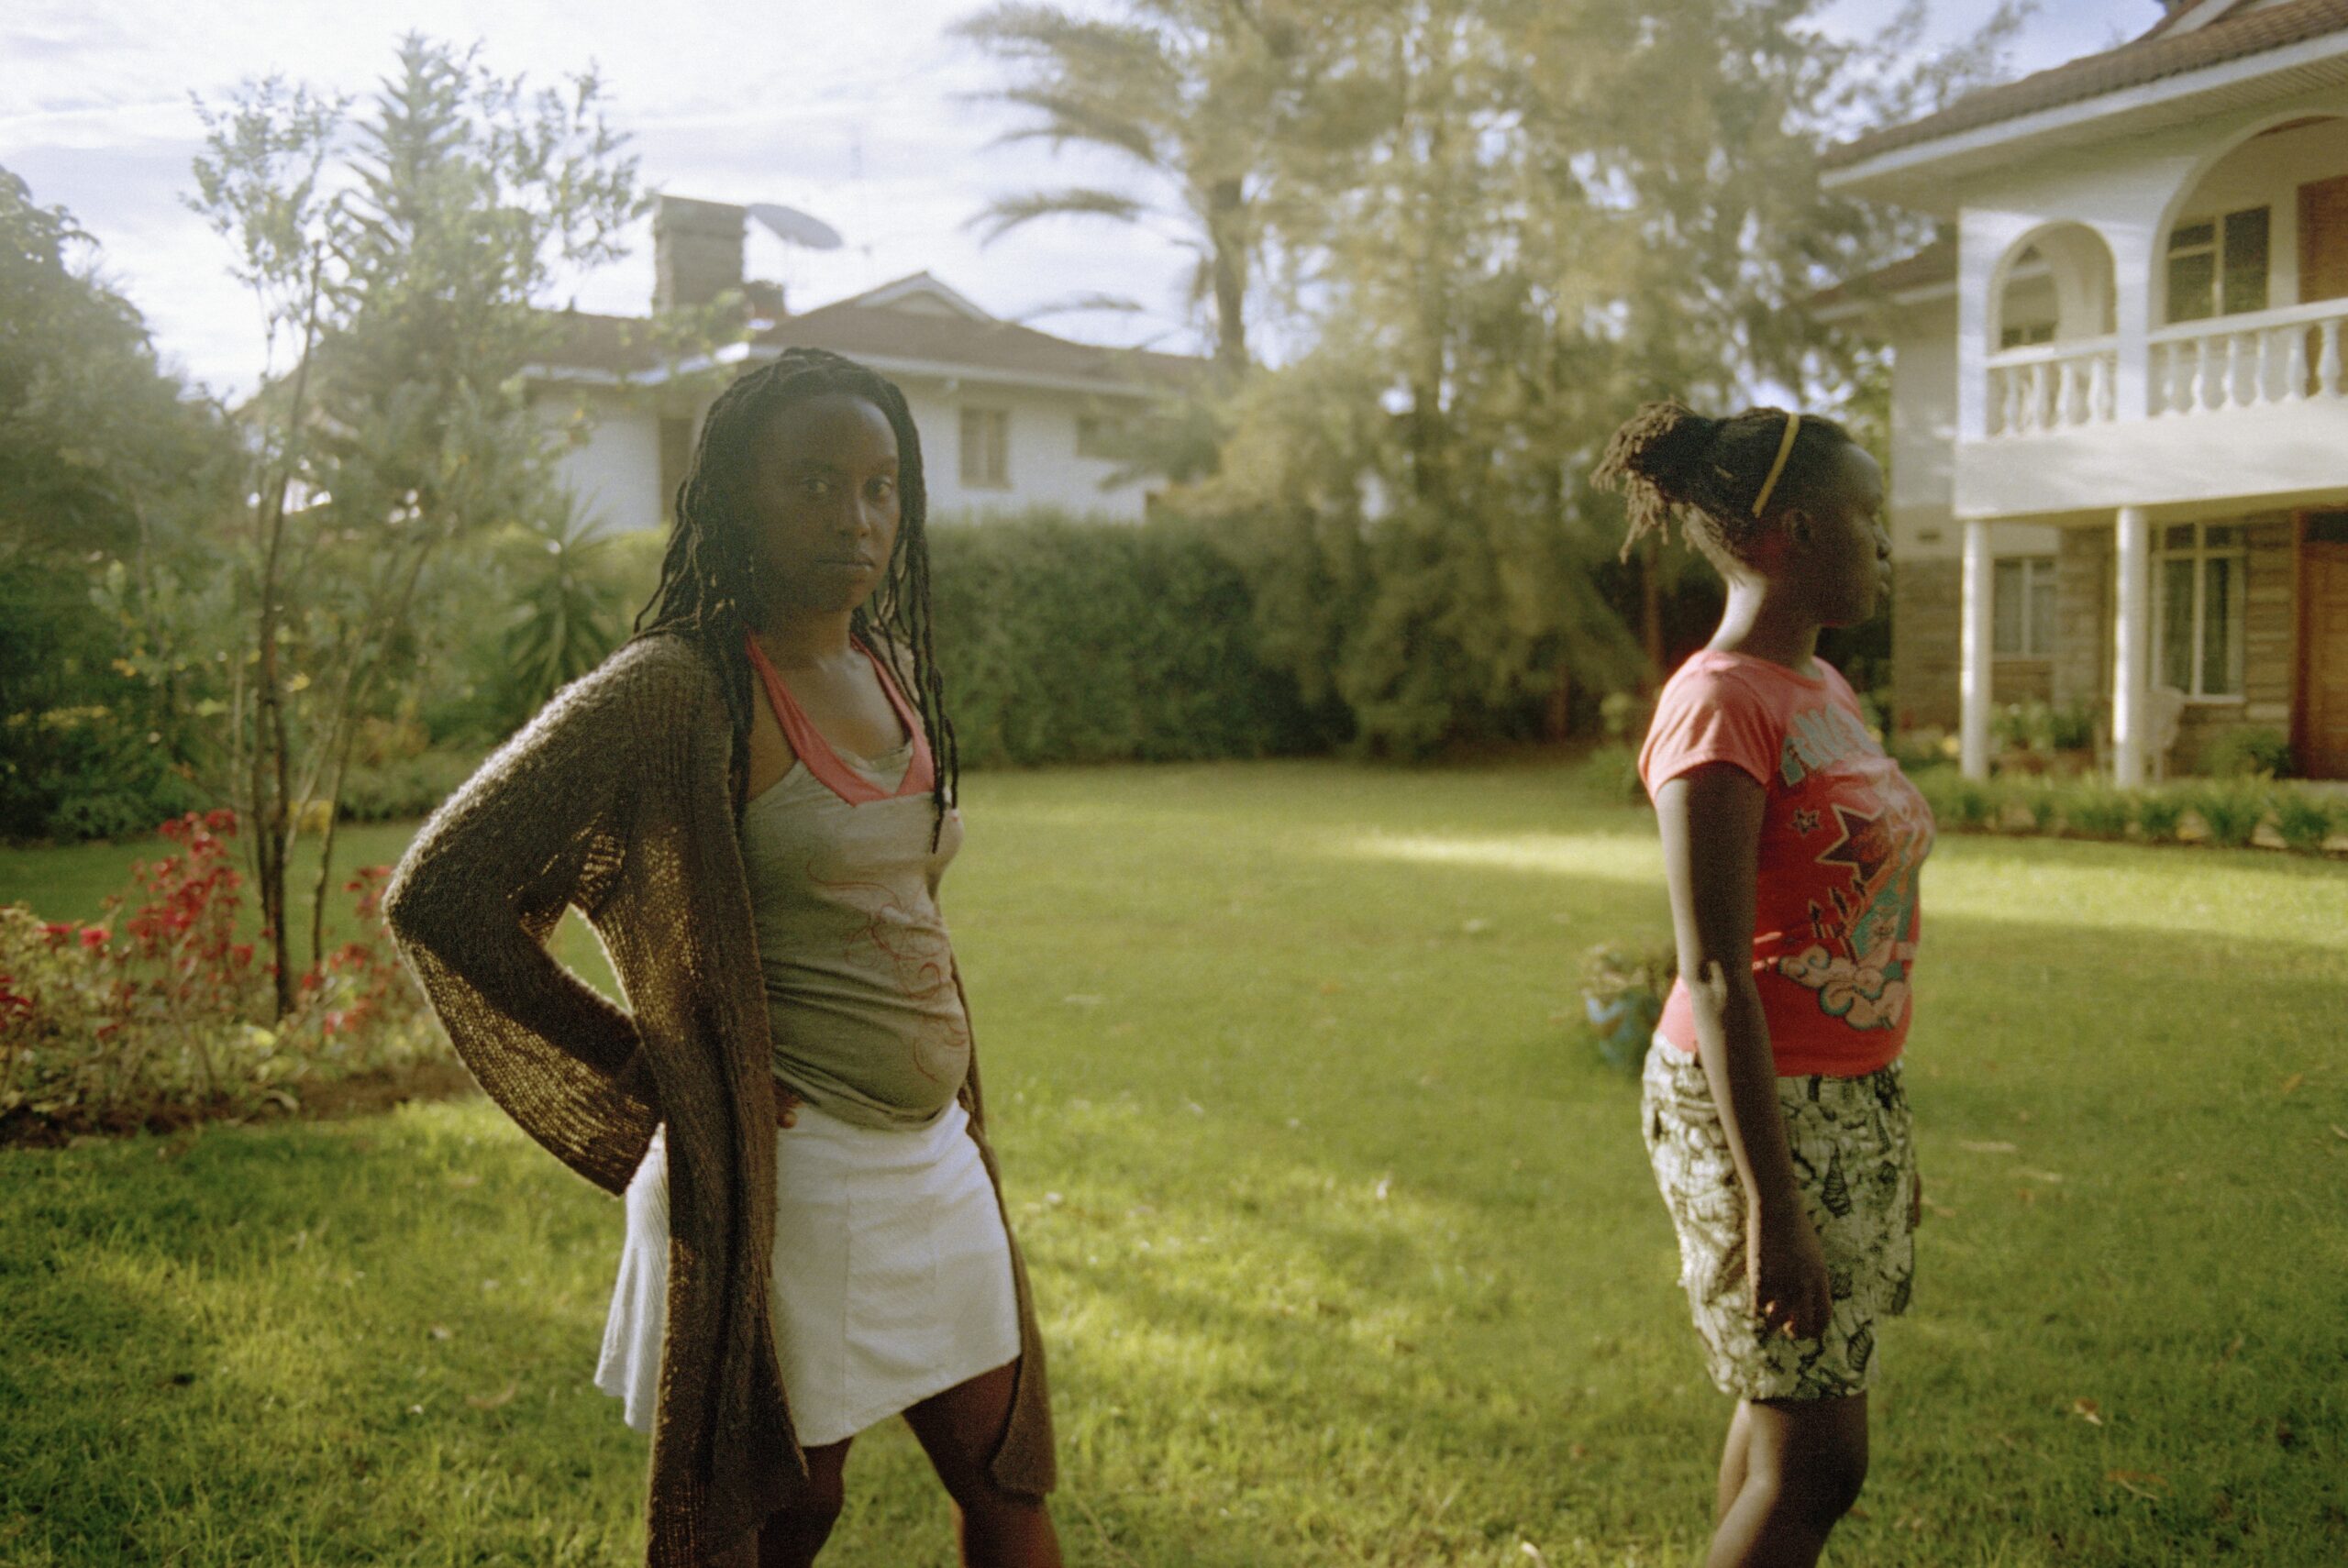 Mimi Cherono Ng’ok, Chebet and Chemu in the garden, from “The Other Country”, 2008-2016 Courtesy the artist and The Walther Collection